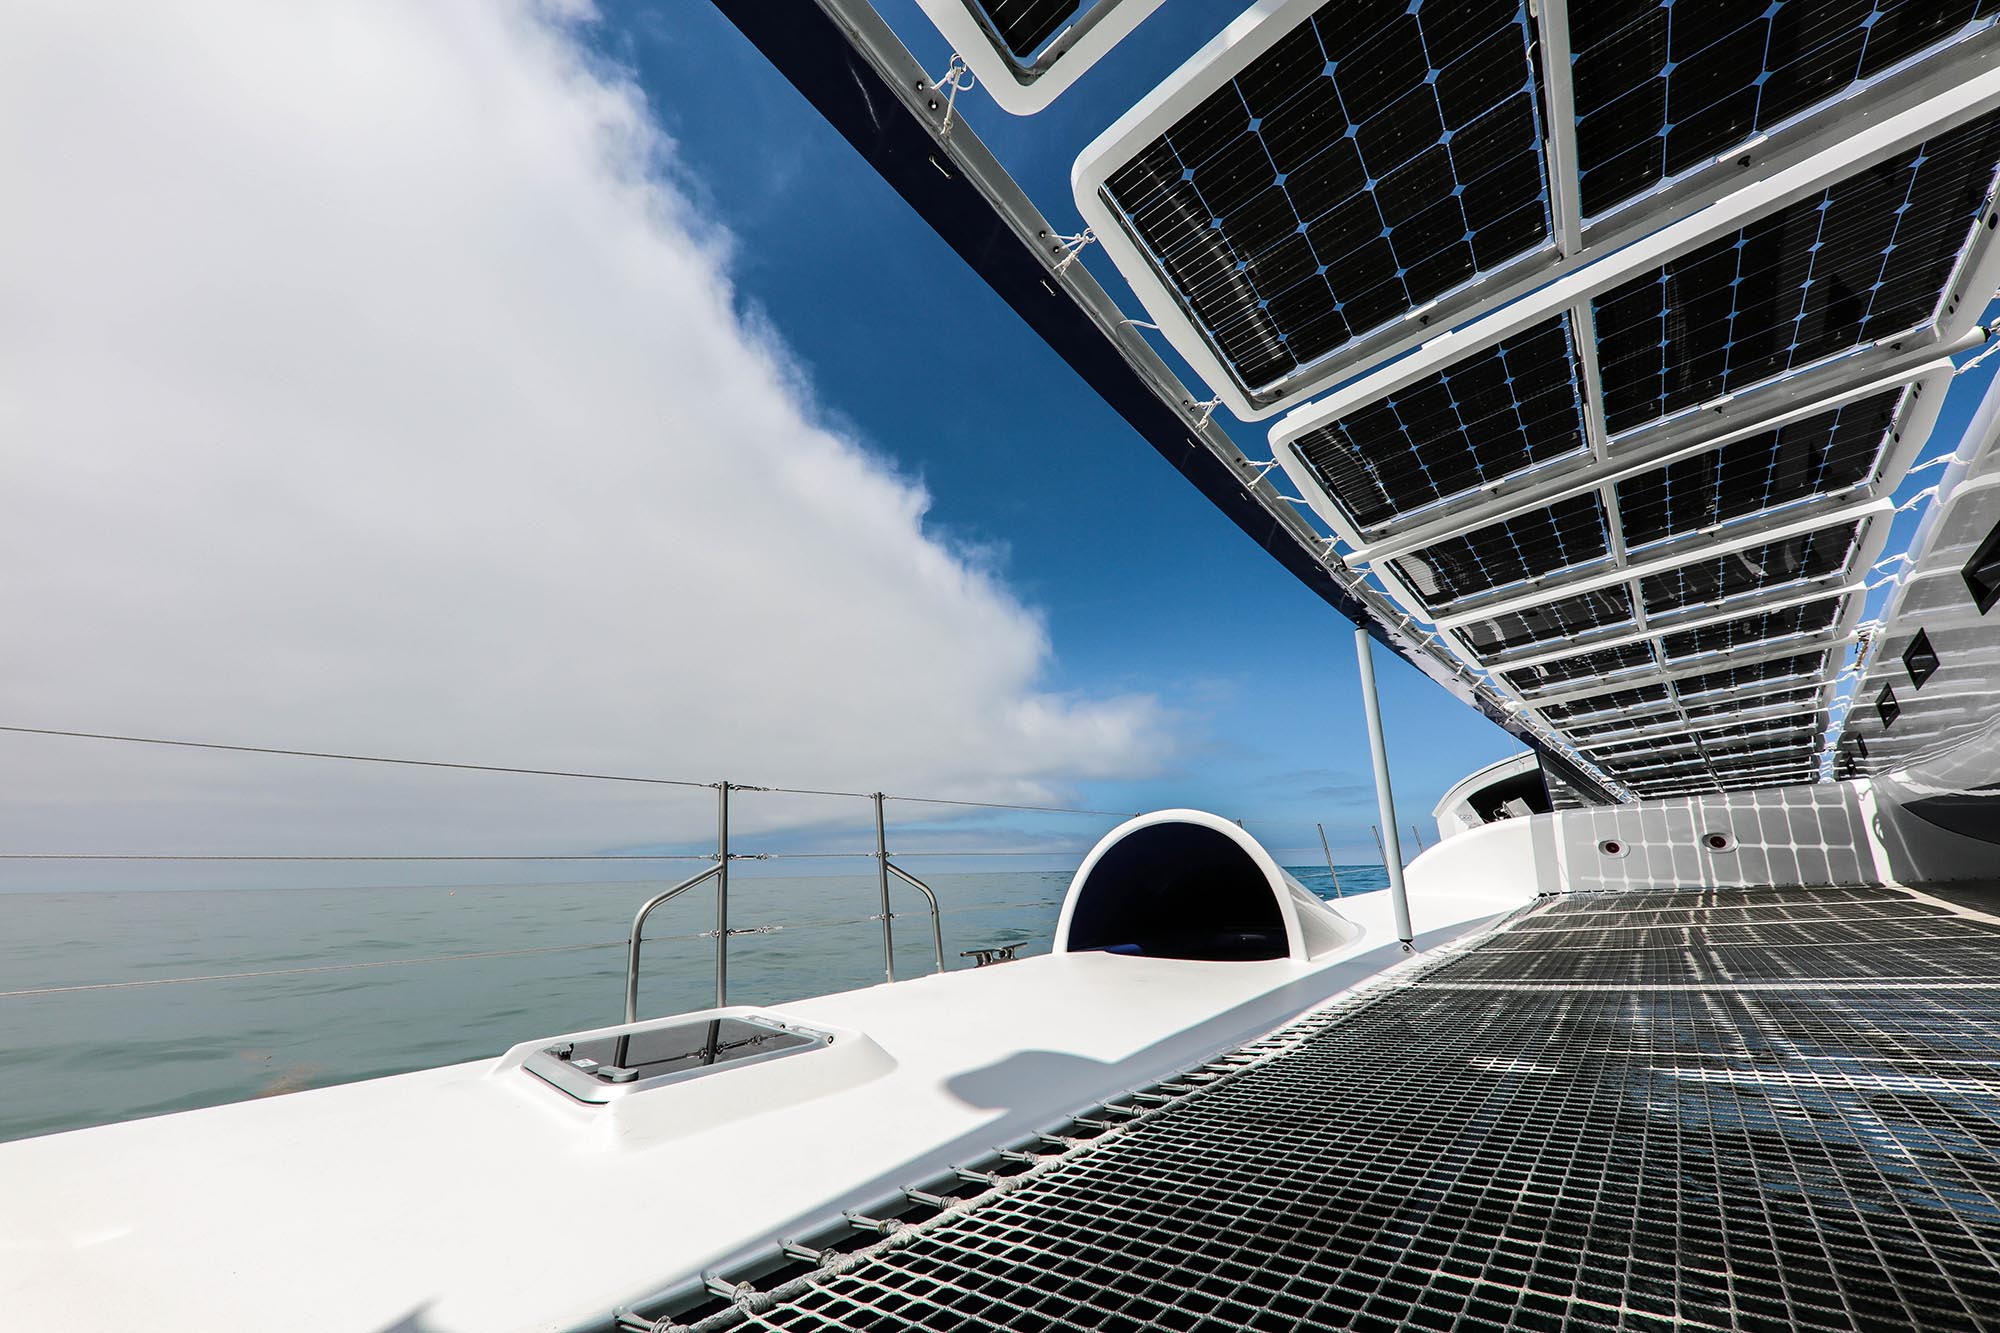 Double-sided, or bifacial, solar panels can use the sunlight reflected from the water as well as that shining down from above to produce energy. Image credit - Jérémy Bidon/ Energy Observer